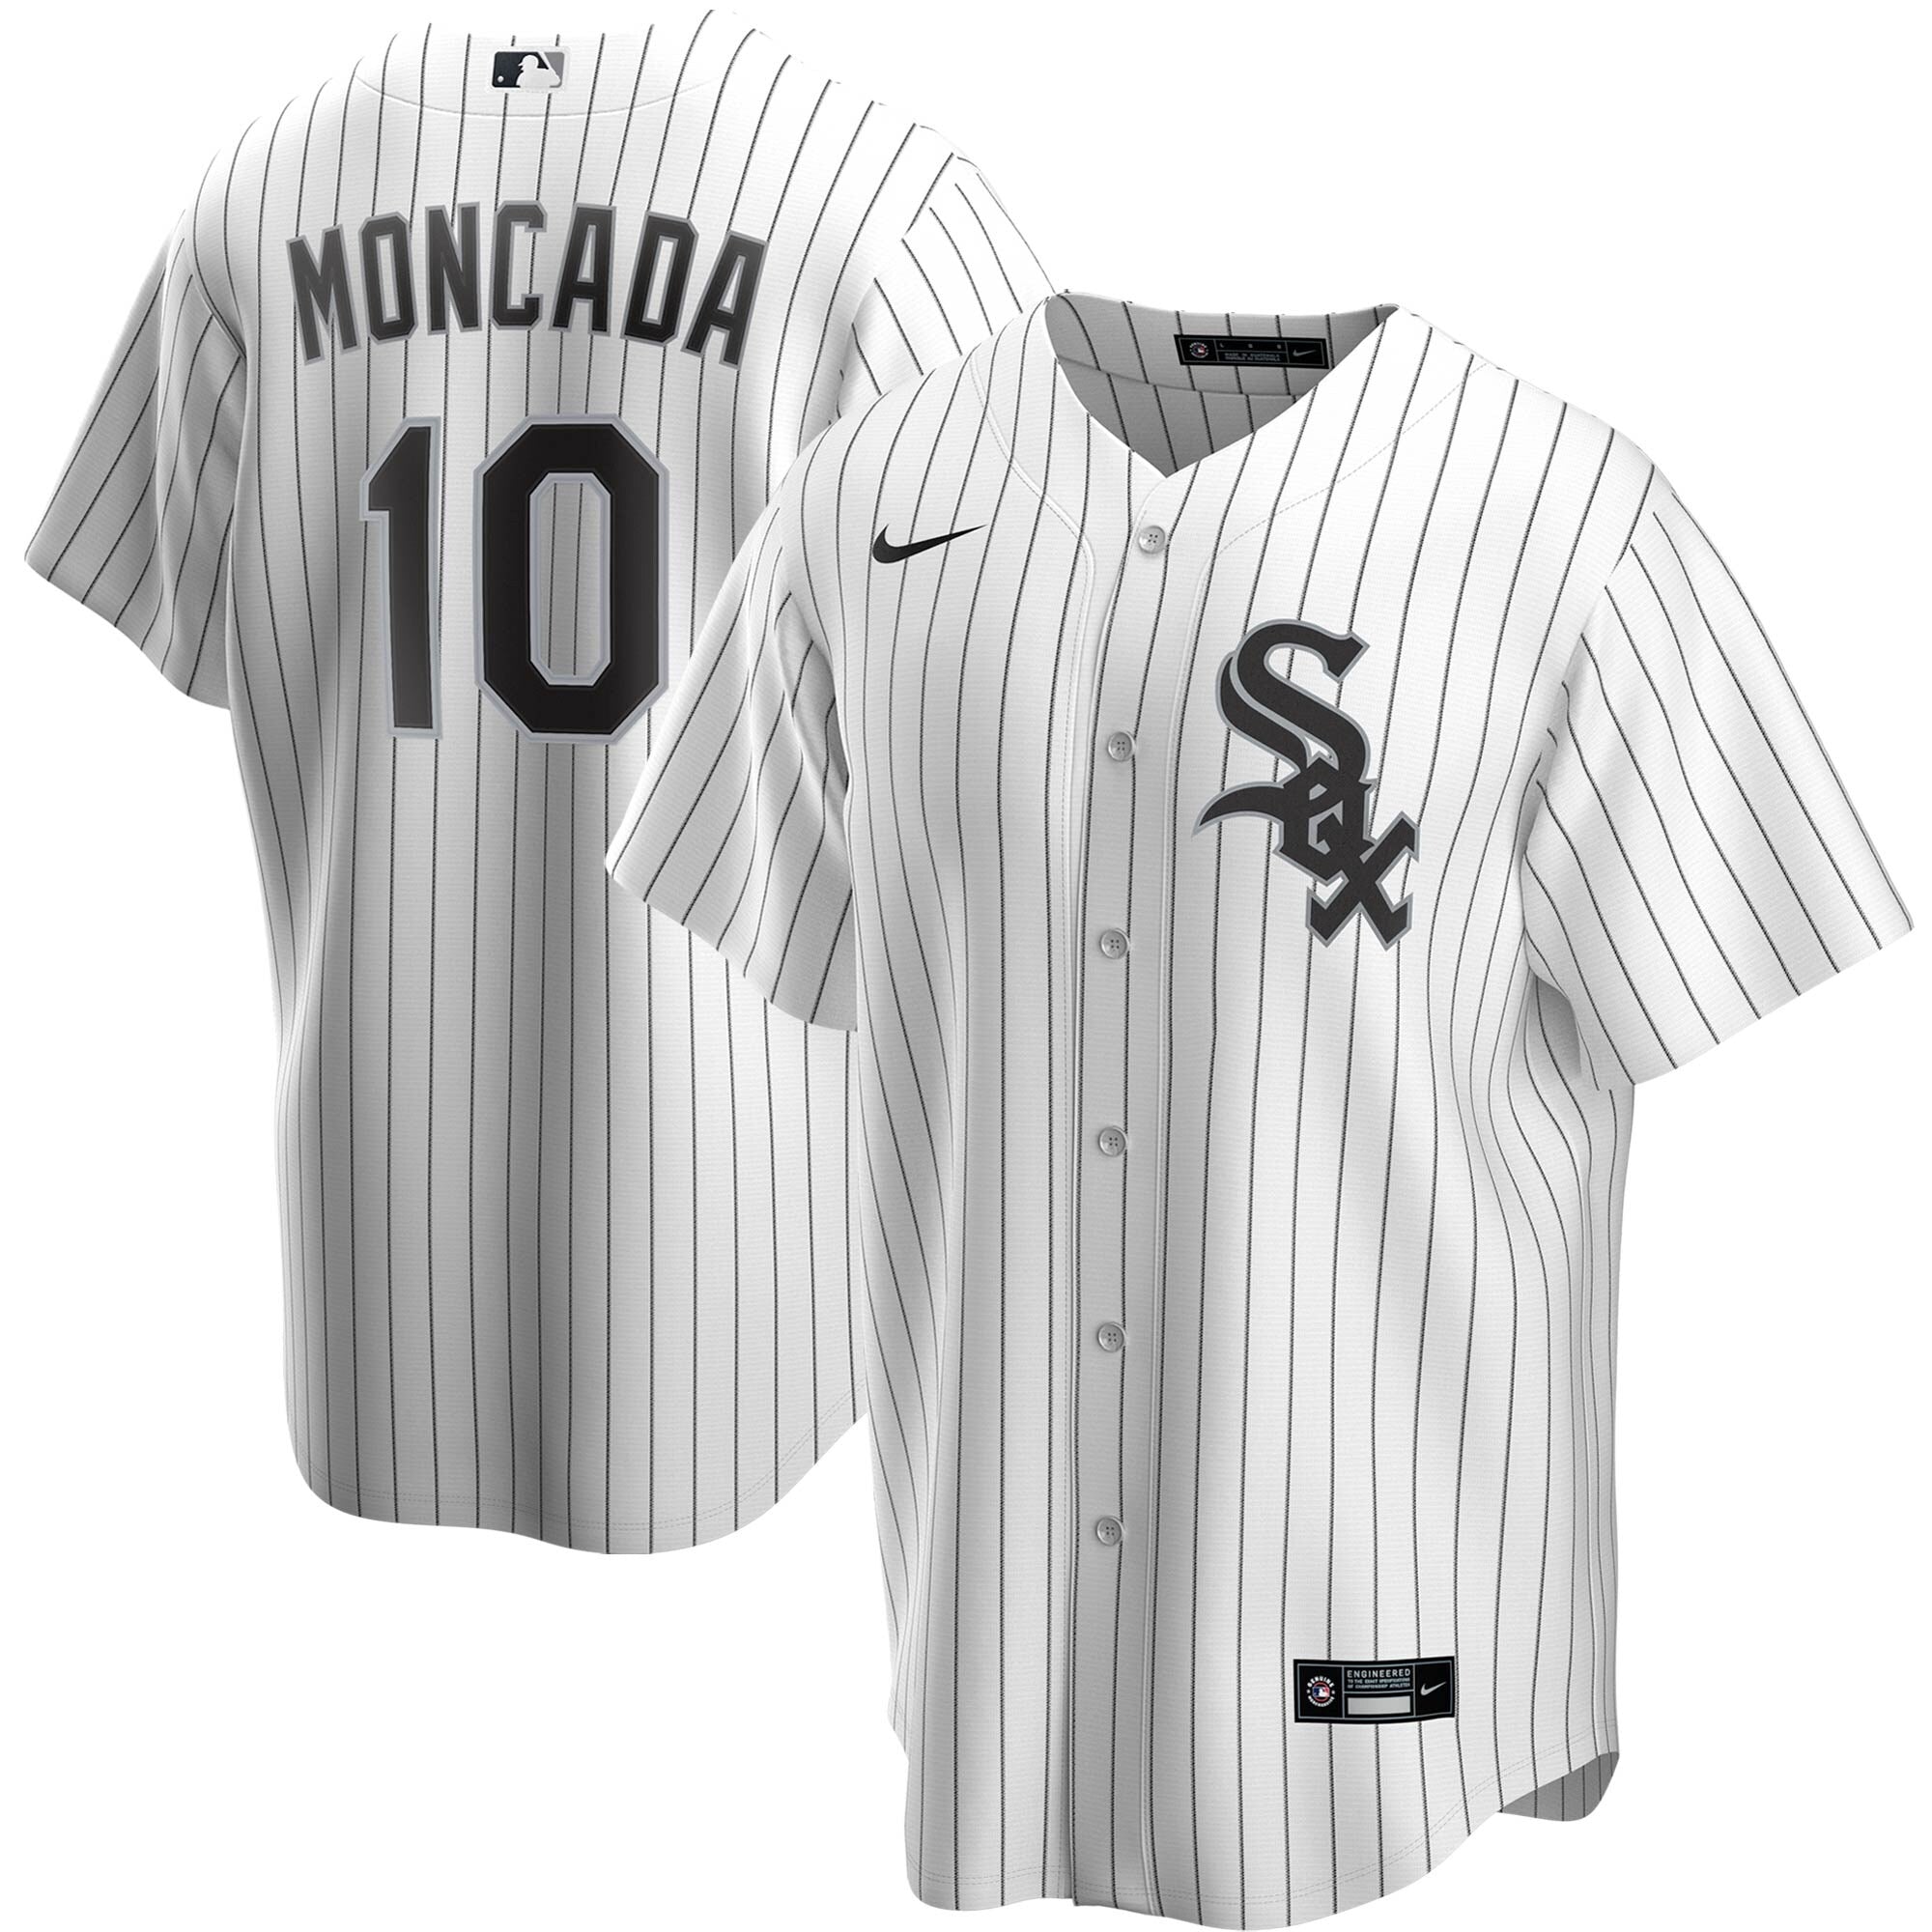 Dylan Cease Chicago White Sox Home Men's Replica Jersey